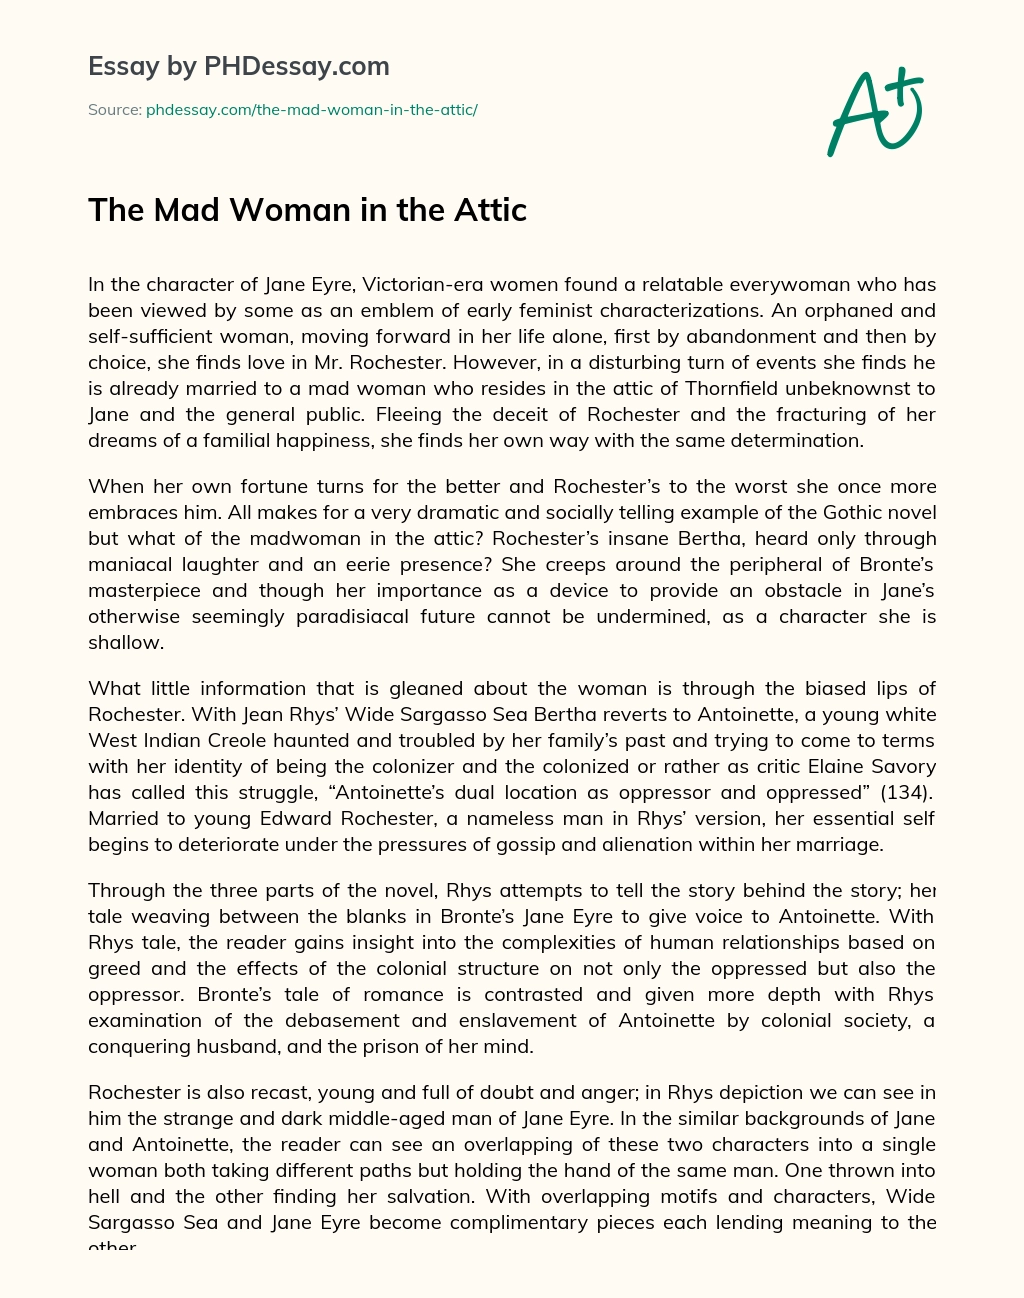 The Mad Woman in the Attic essay